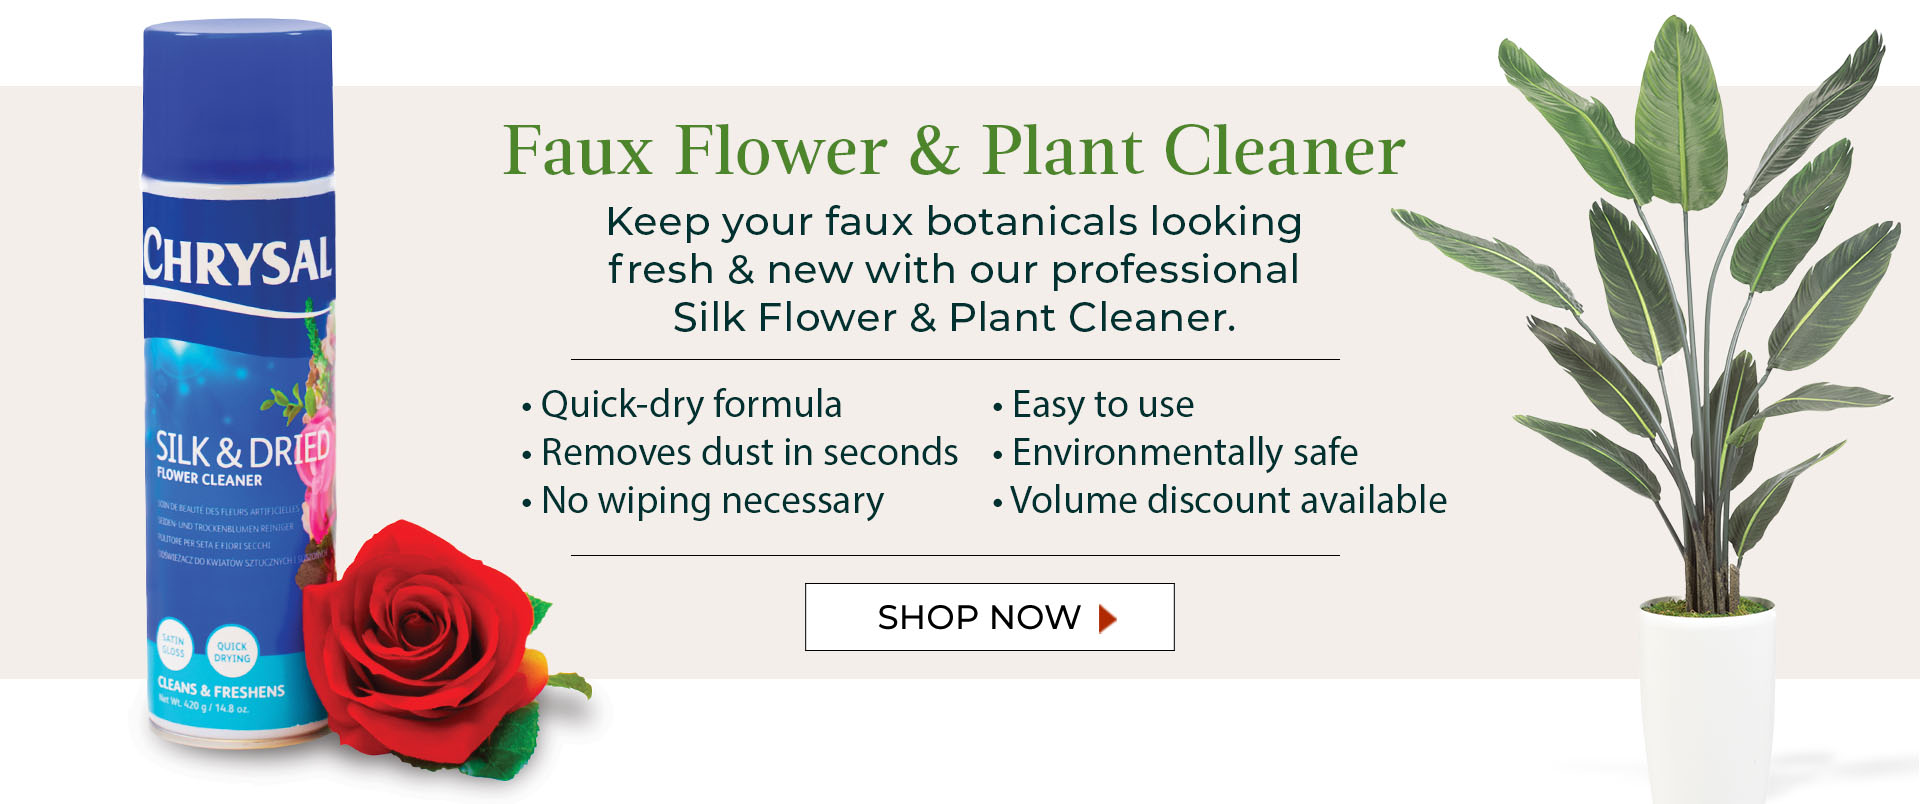 Faux Flower & Plant Cleaner: Keep your faux botanicals looking fresh and new with our professional silk flower & plant cleaner. 